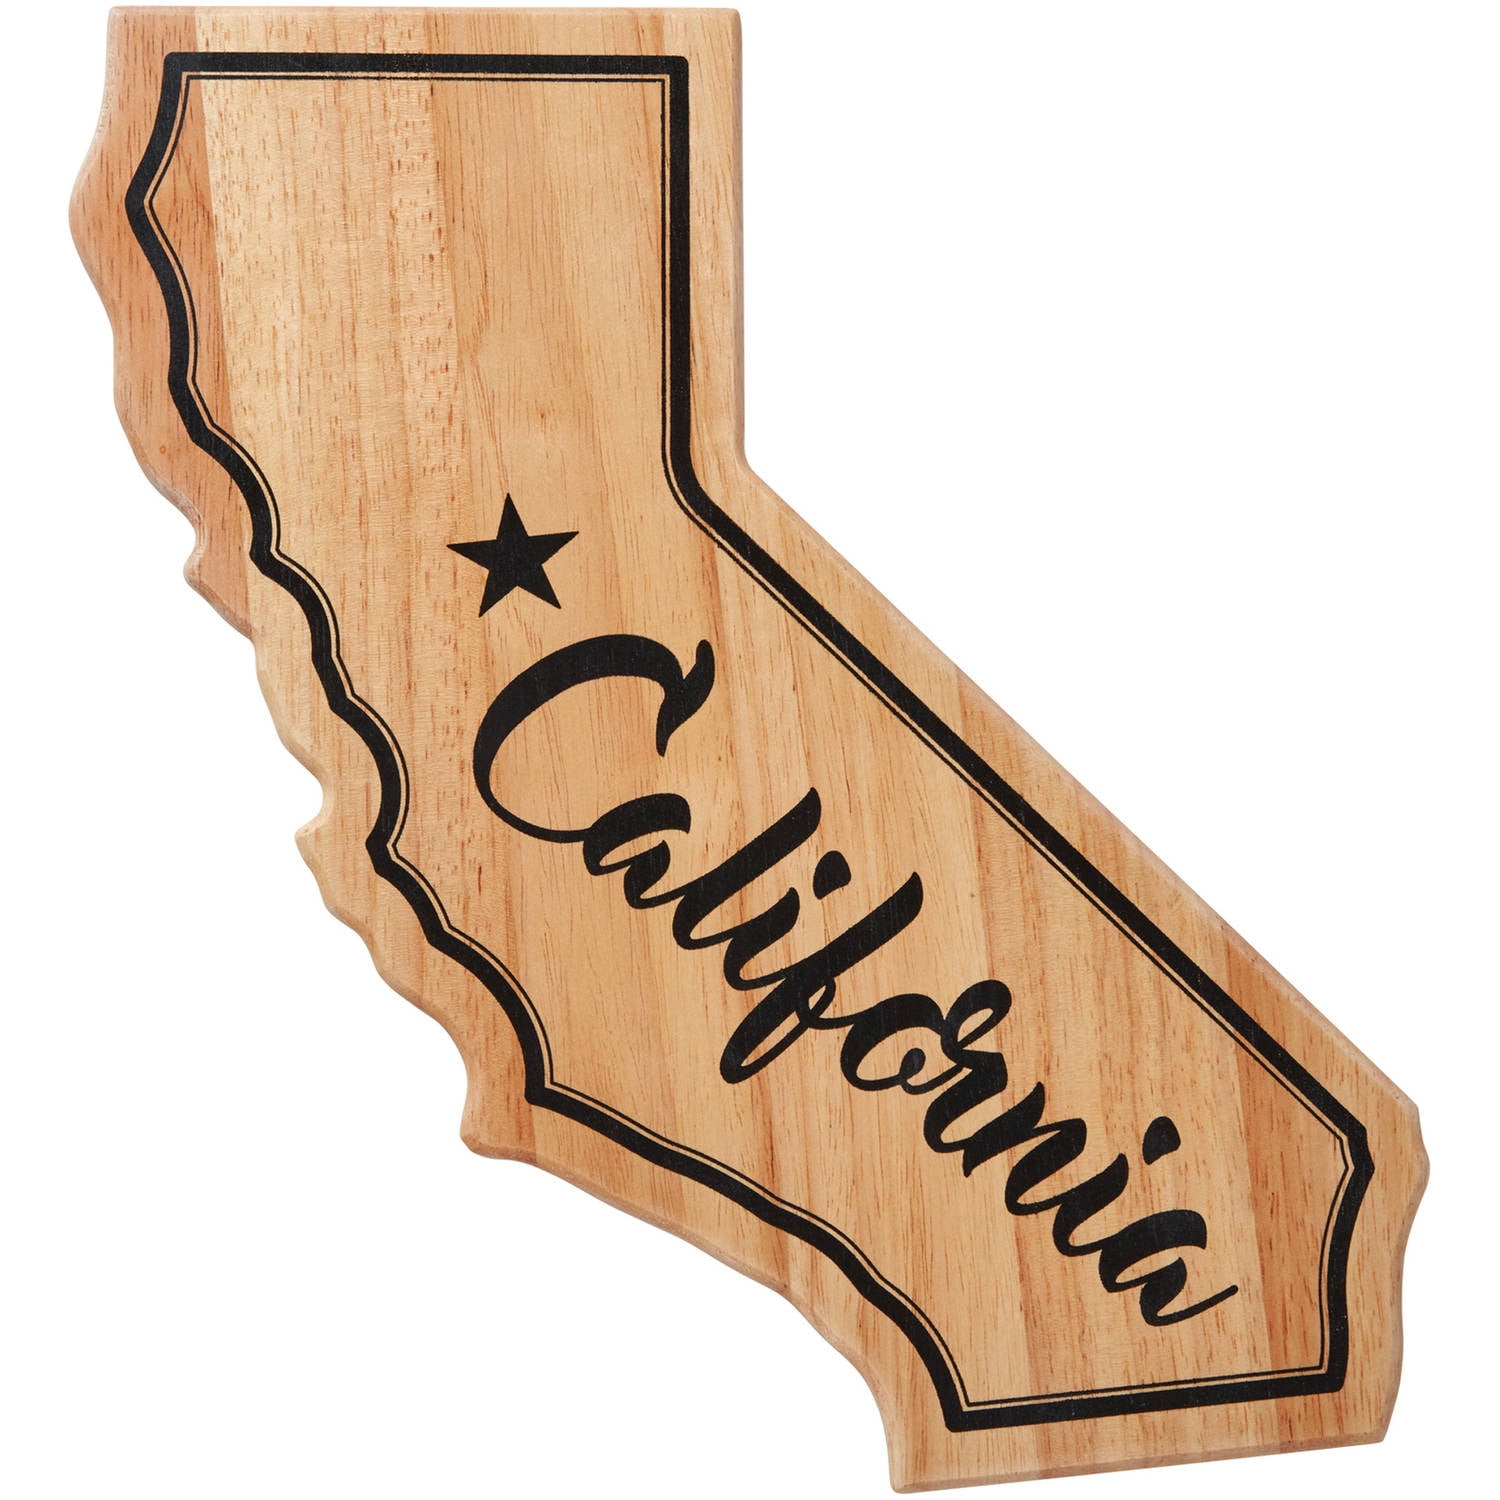 Vellum California Shaped Wood Paper Composite Serving and Cutting Board 14-1/4 x 11